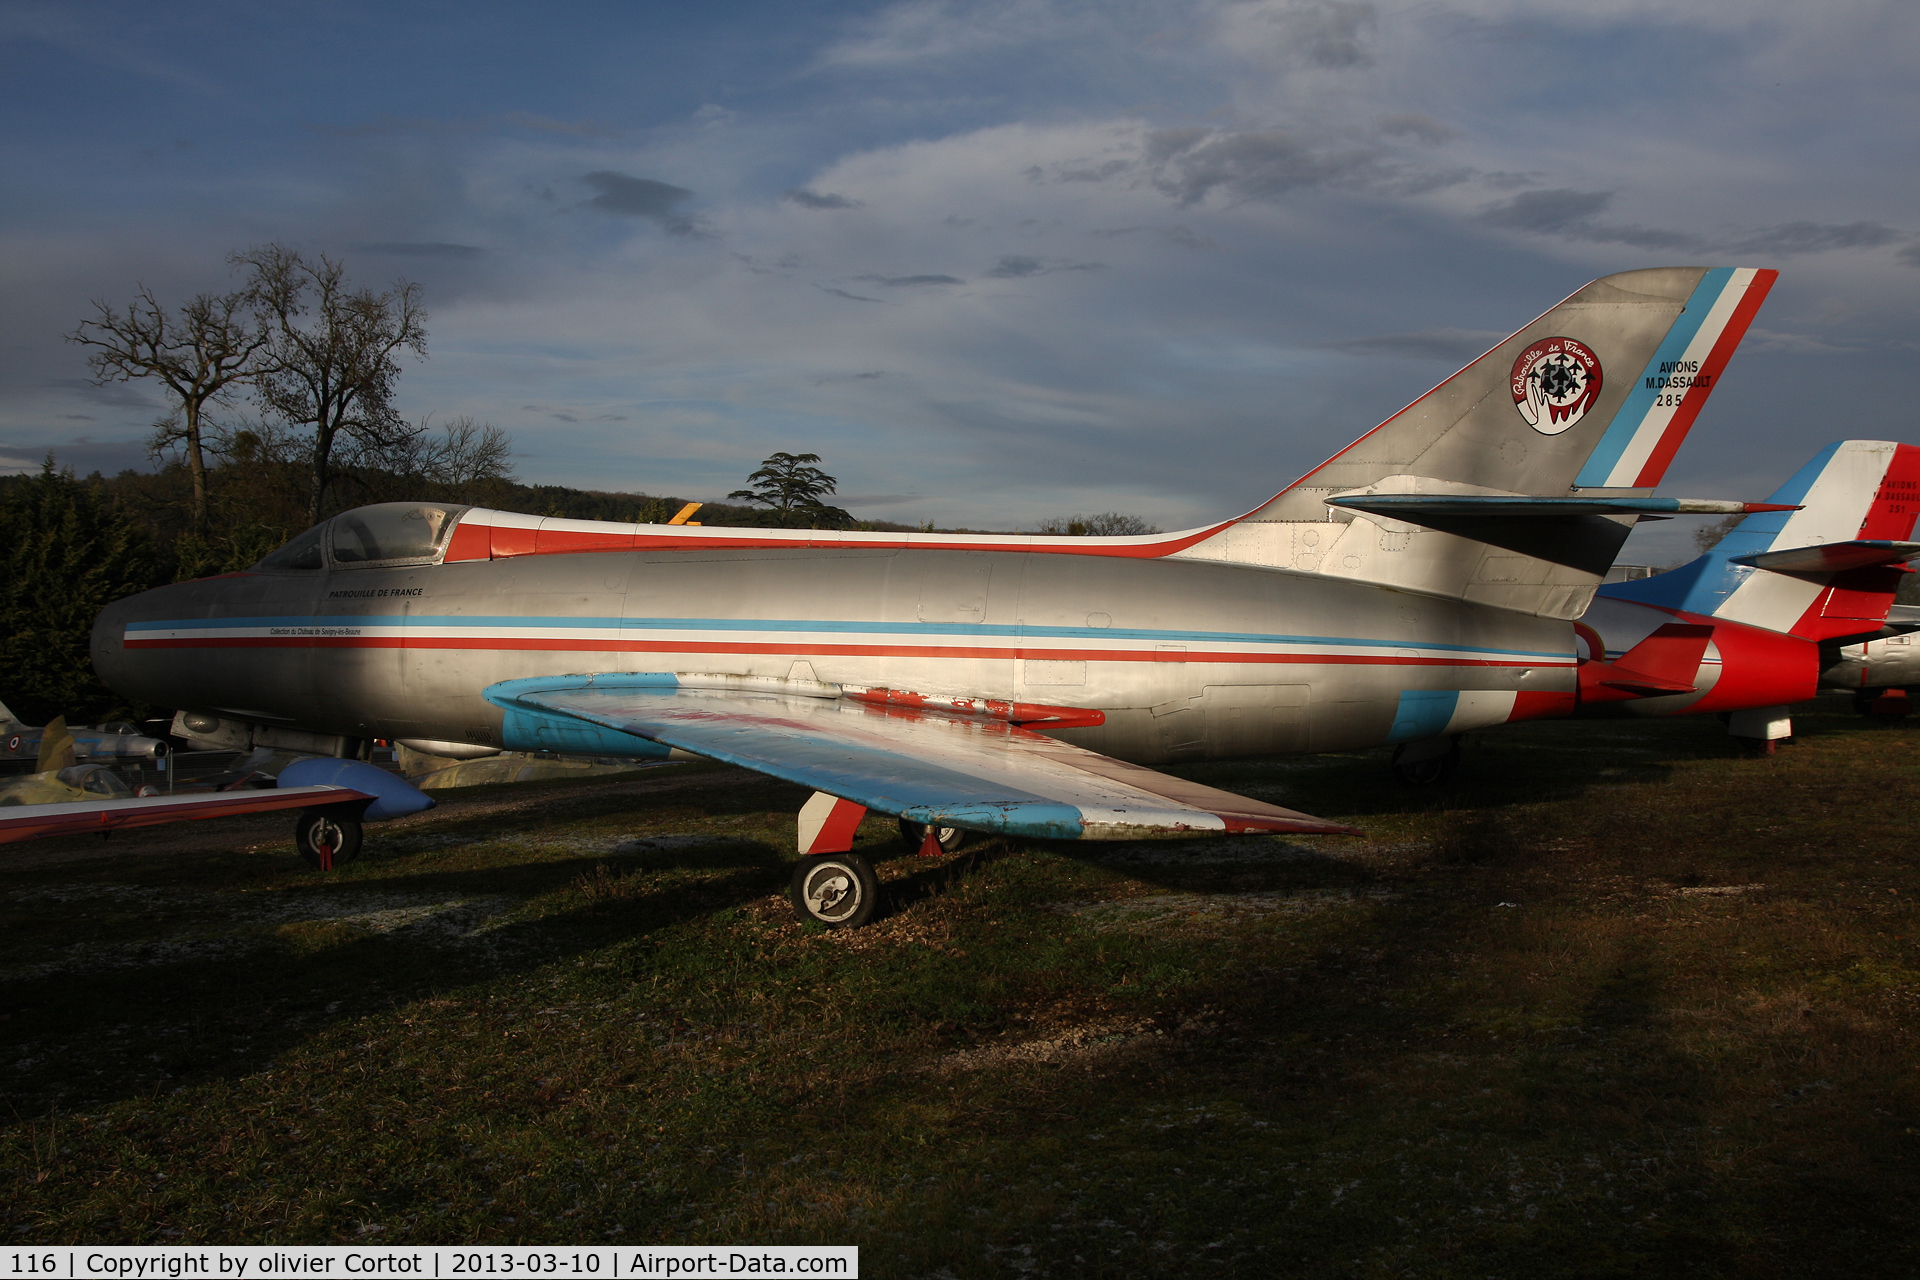 116, Dassault Mystere IVA C/N 116, painted as patrouille de France aircraft